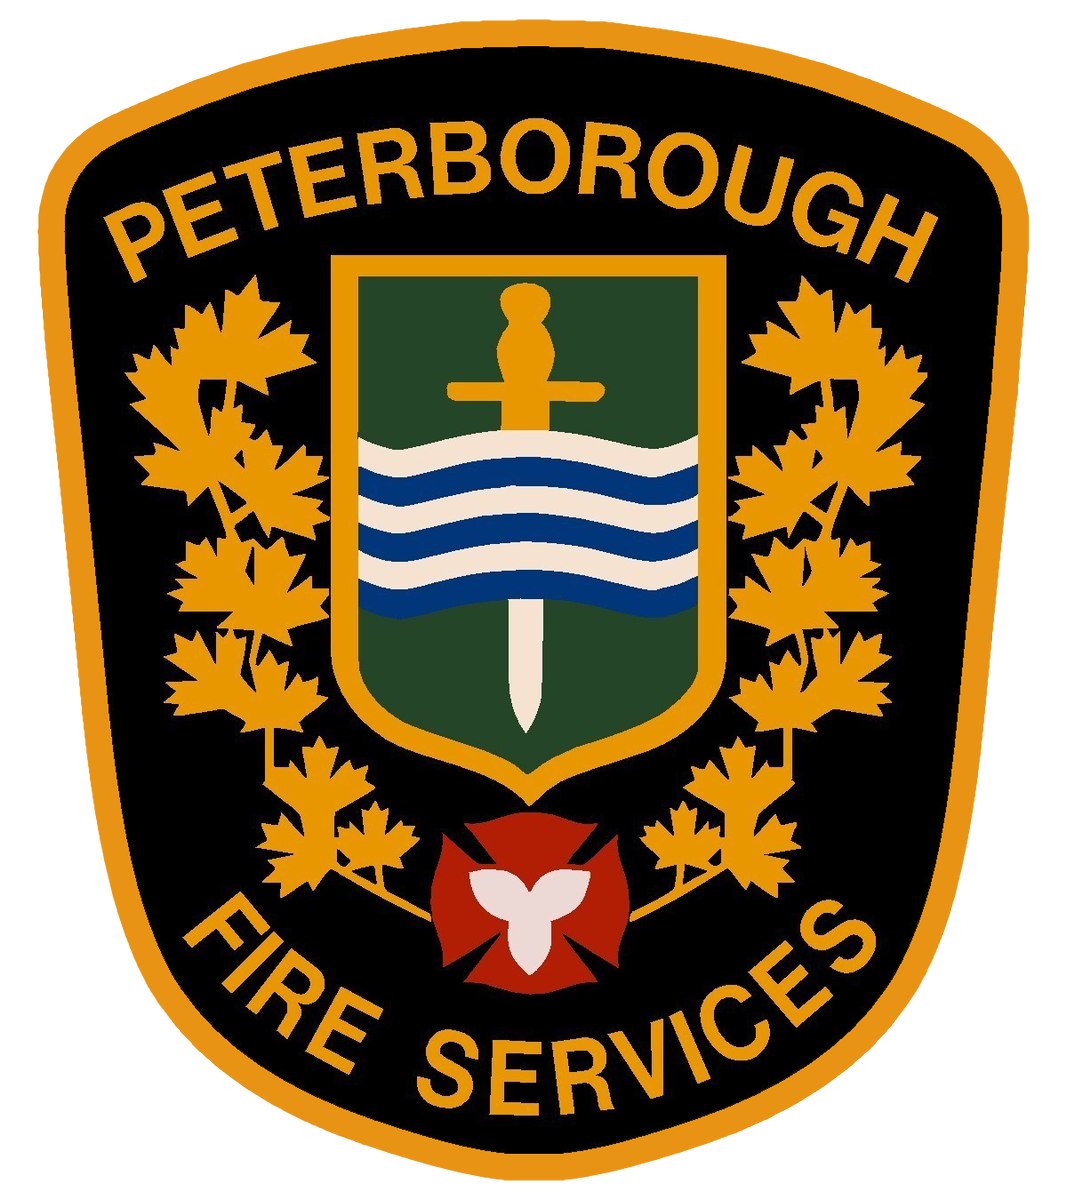 Peterborough firefighters are investigating an early morning kitchen fire.